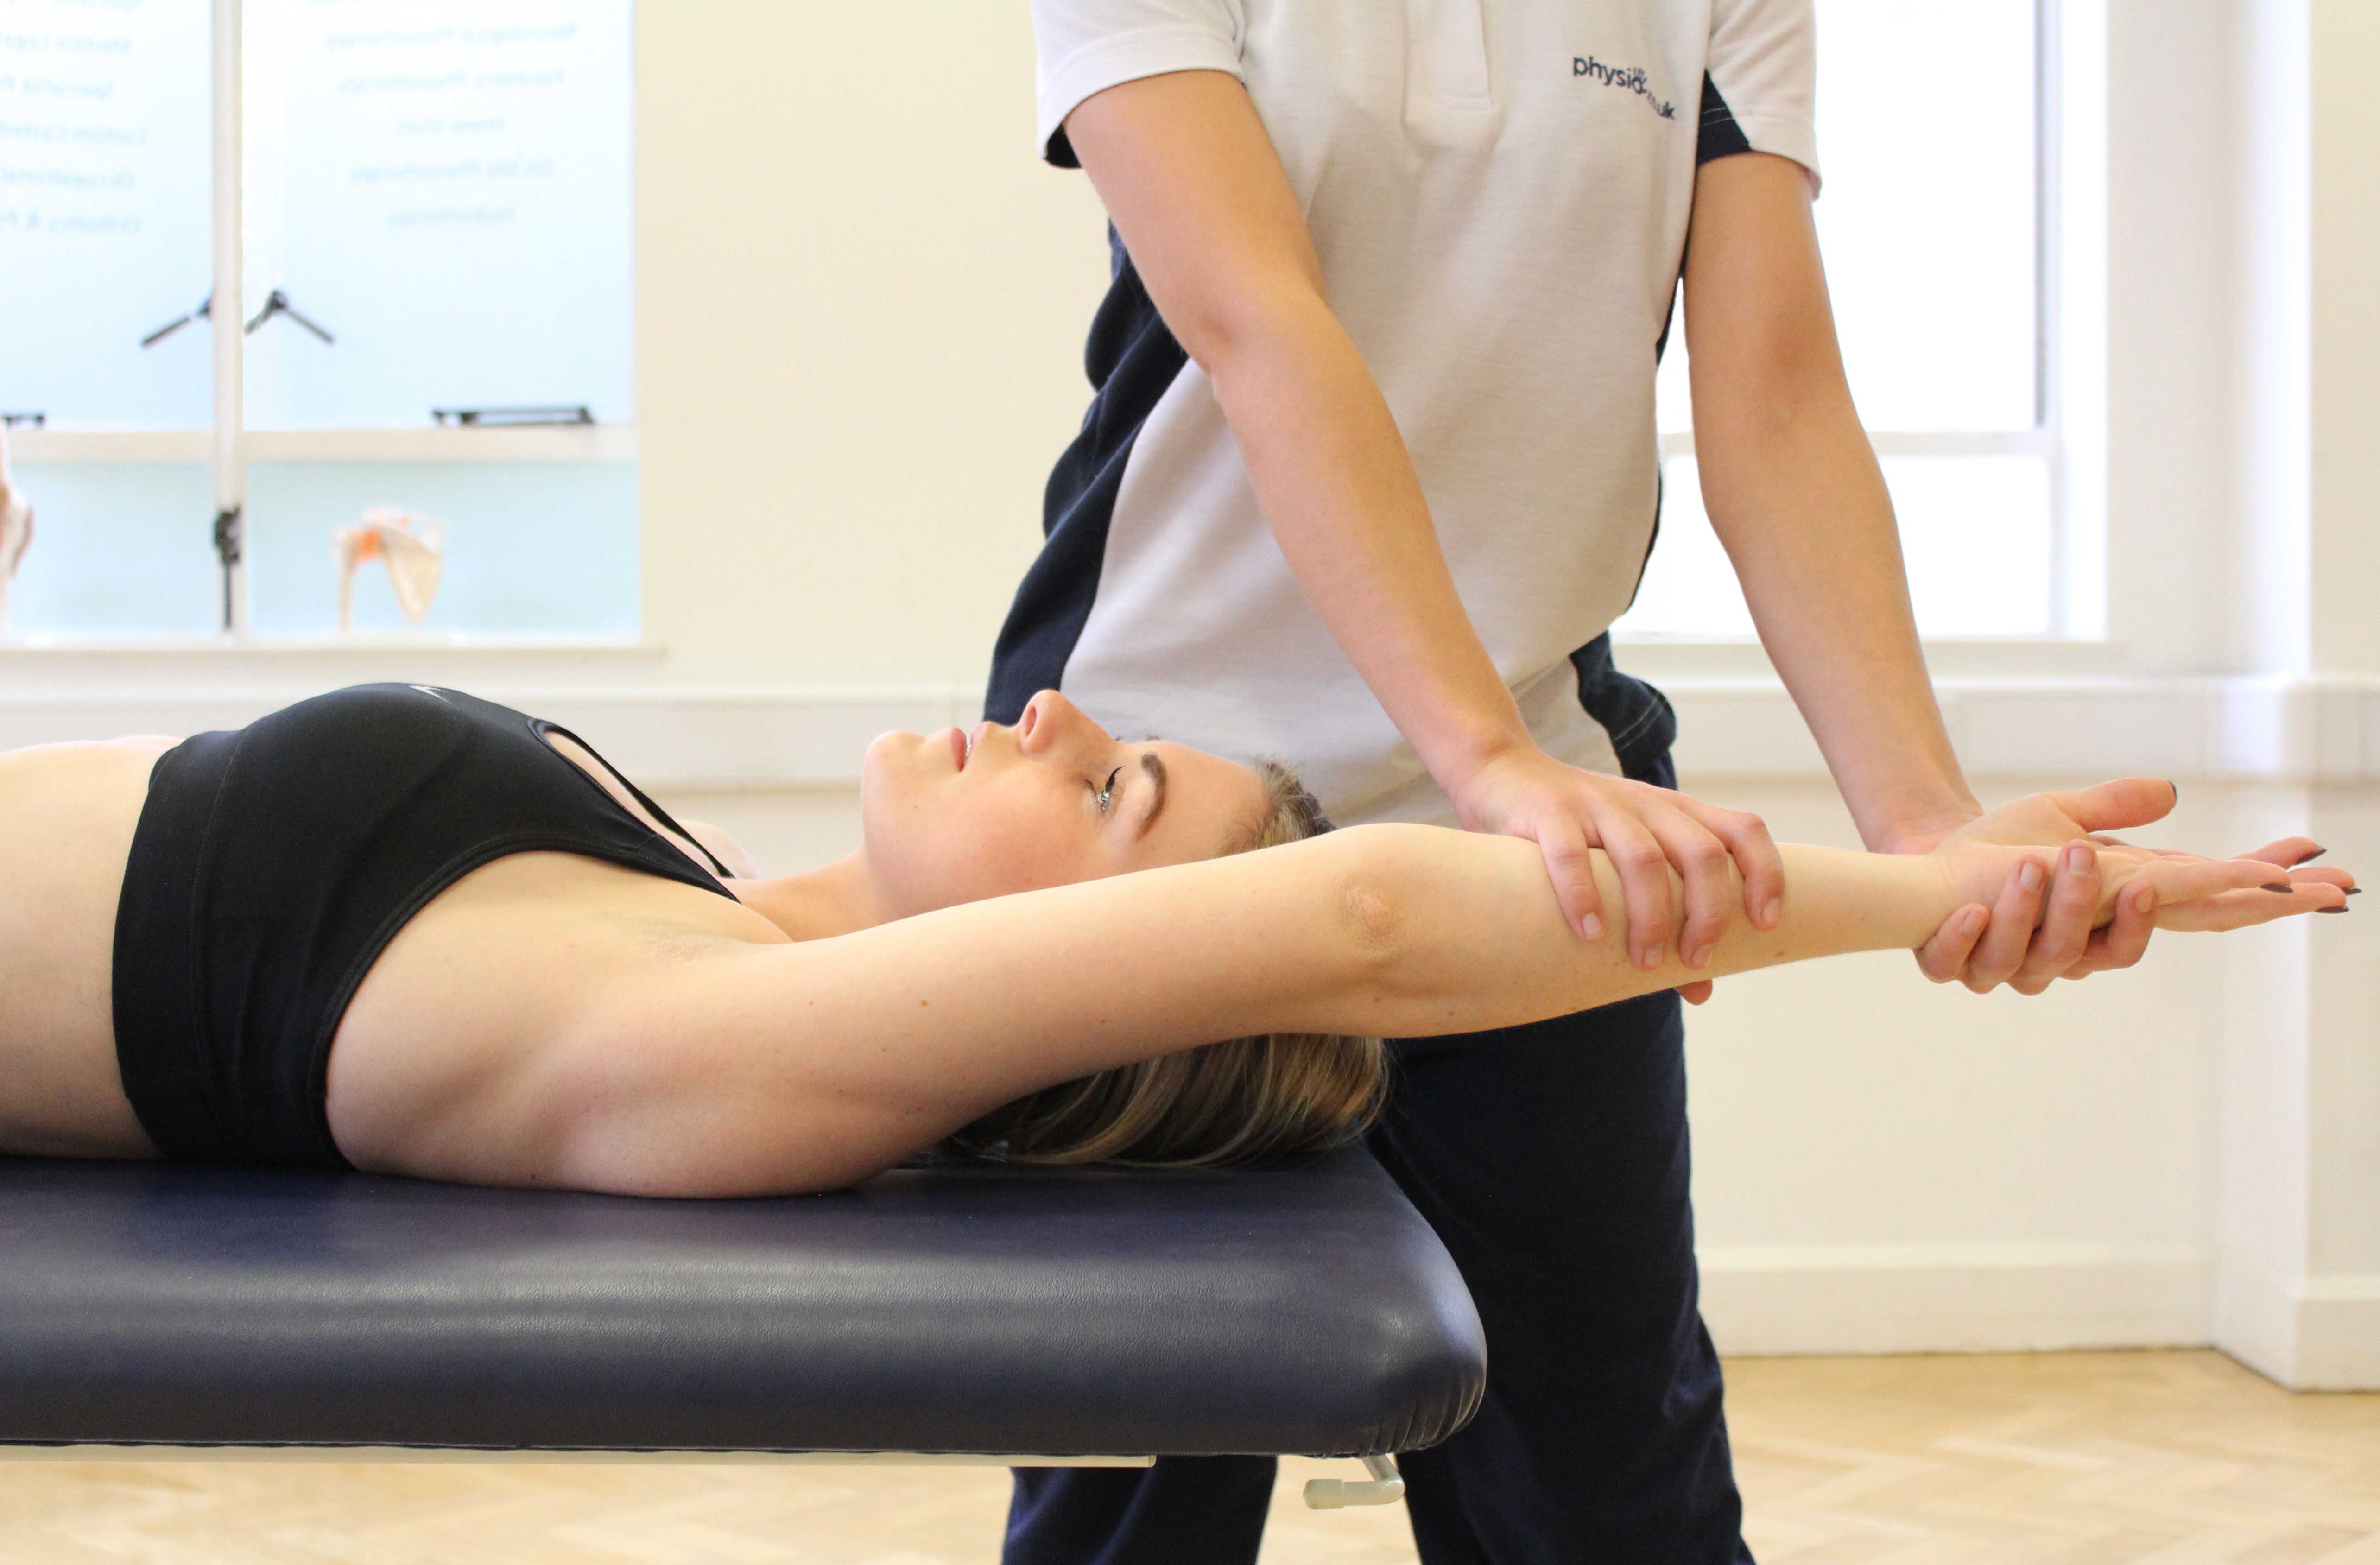 Passive stretch applied to the shoulder by experienced physiotherapist